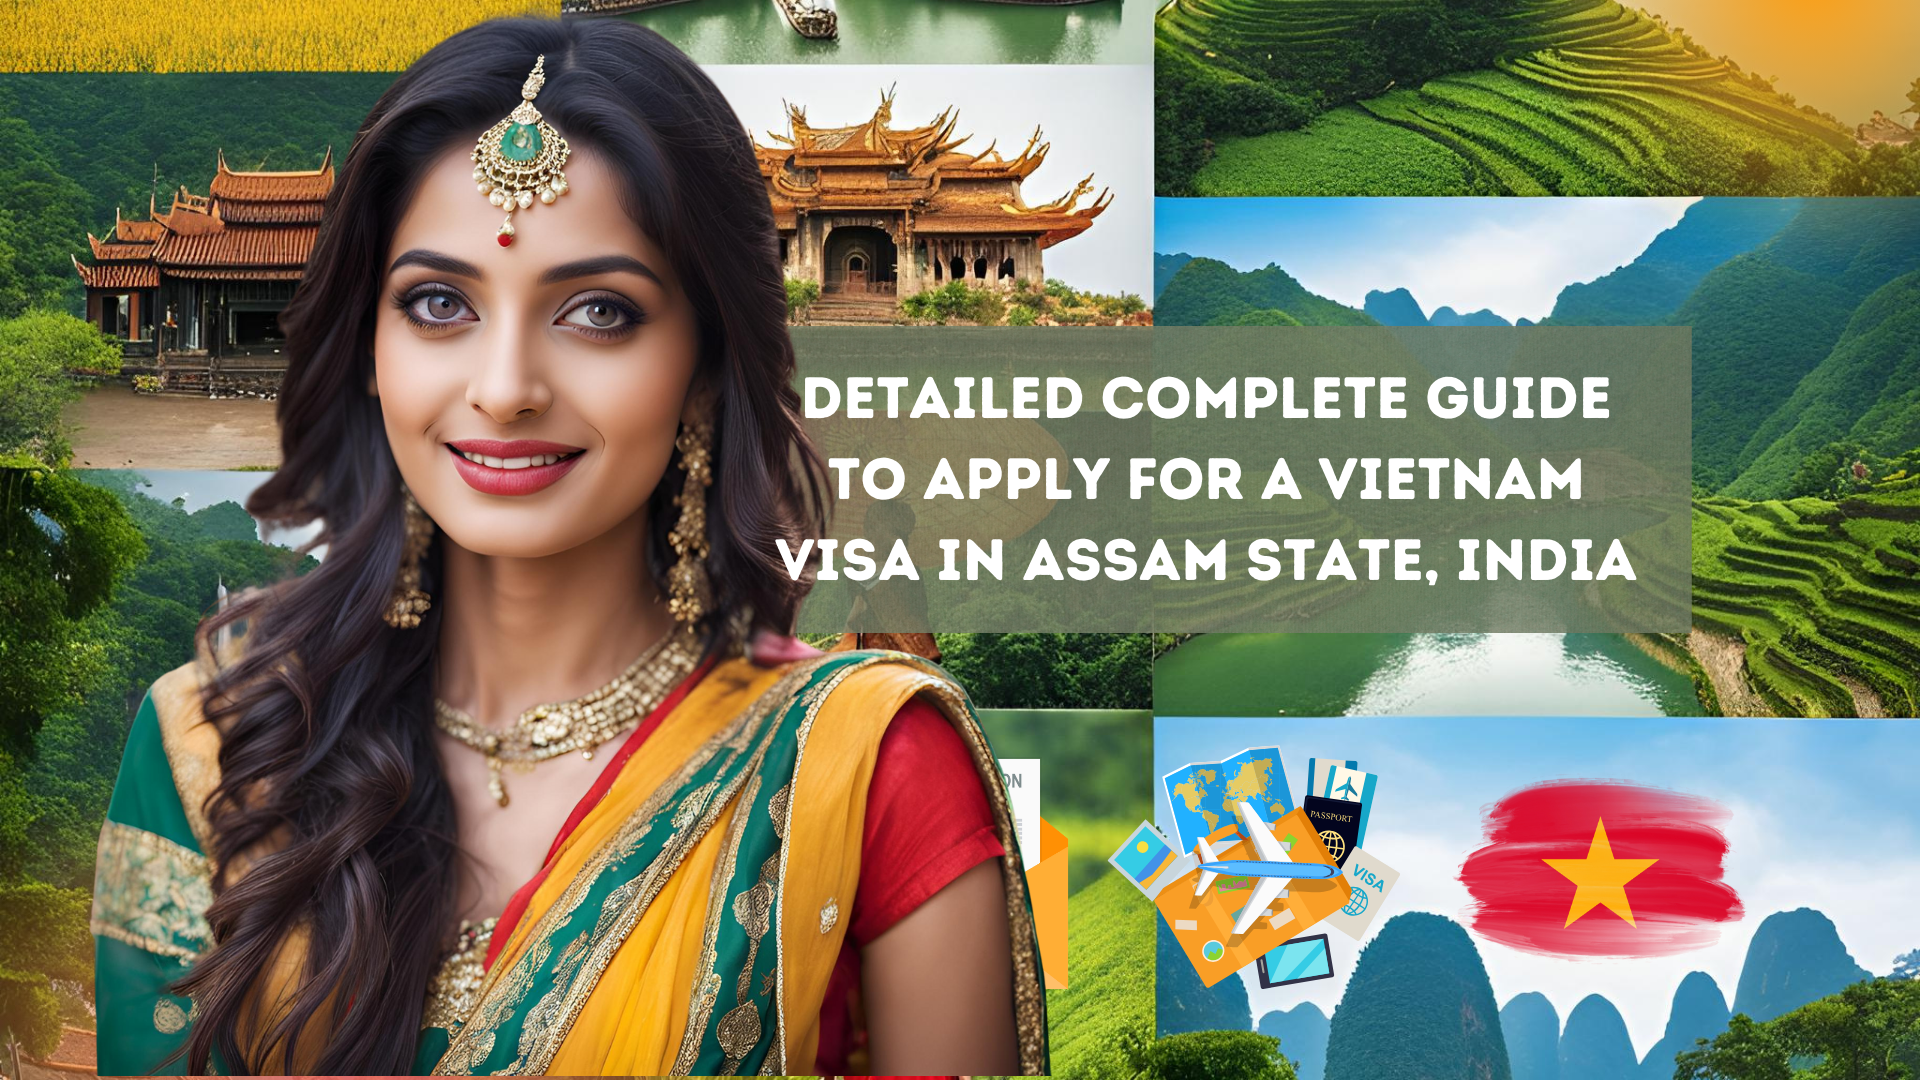 Detailed Complete Guide to Apply for a Vietnam Visa in Assam State, India